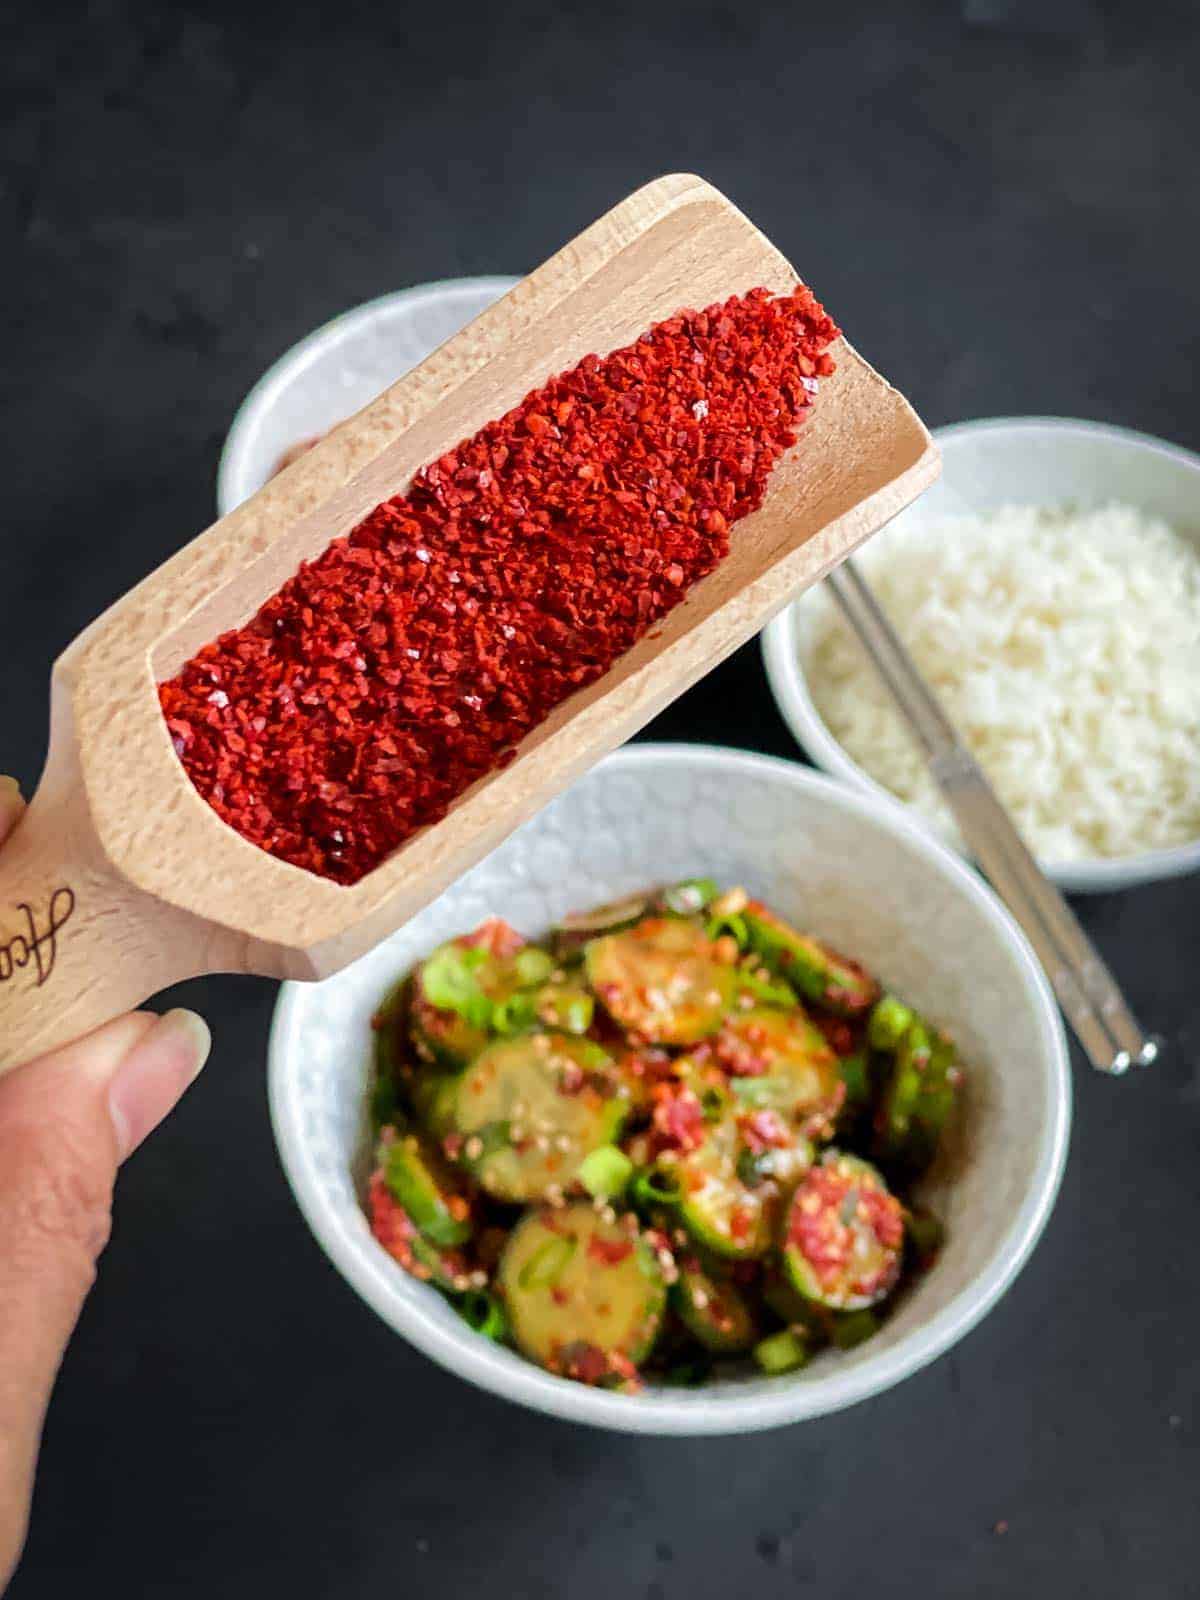 Gochugaru - Korean red chilli flakes, in a wooden spoon over cucumber salad and rice